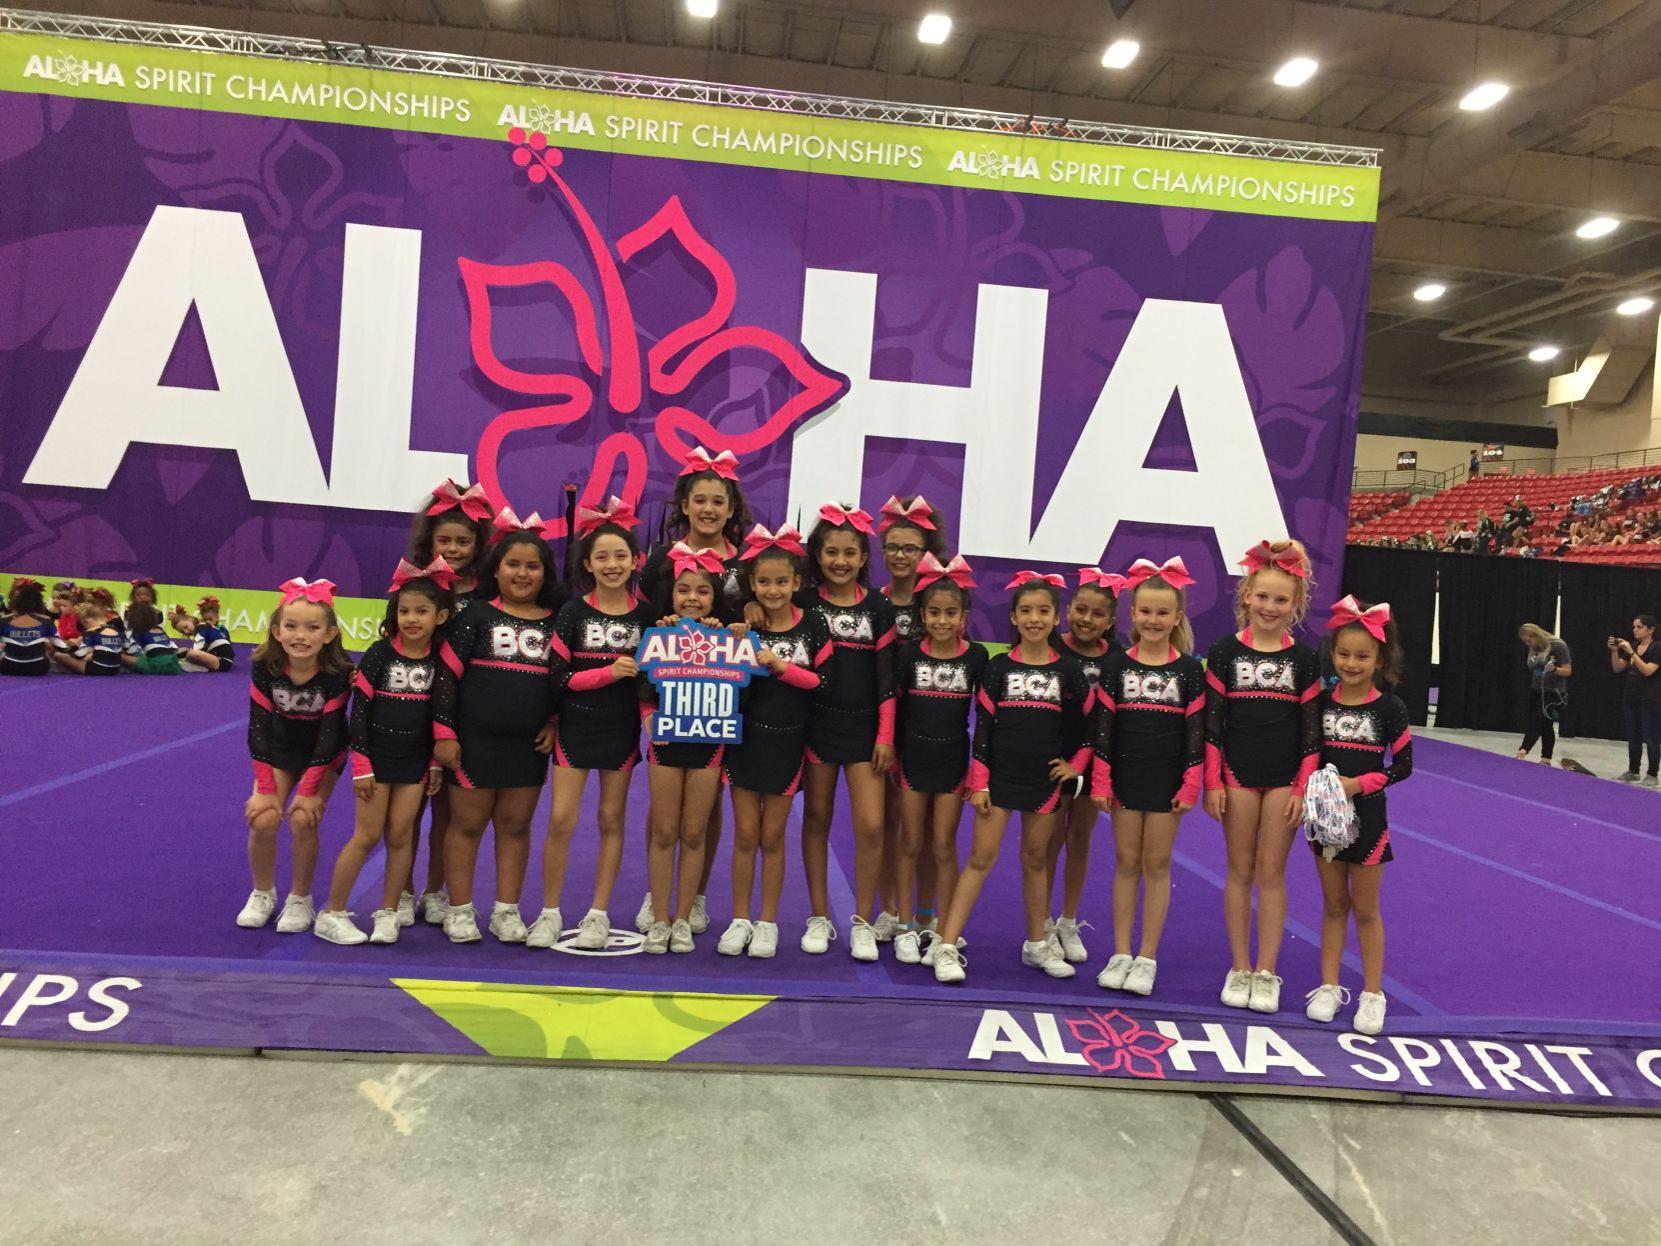 January 13, Technique Gems, a cheerleading group from Chica…